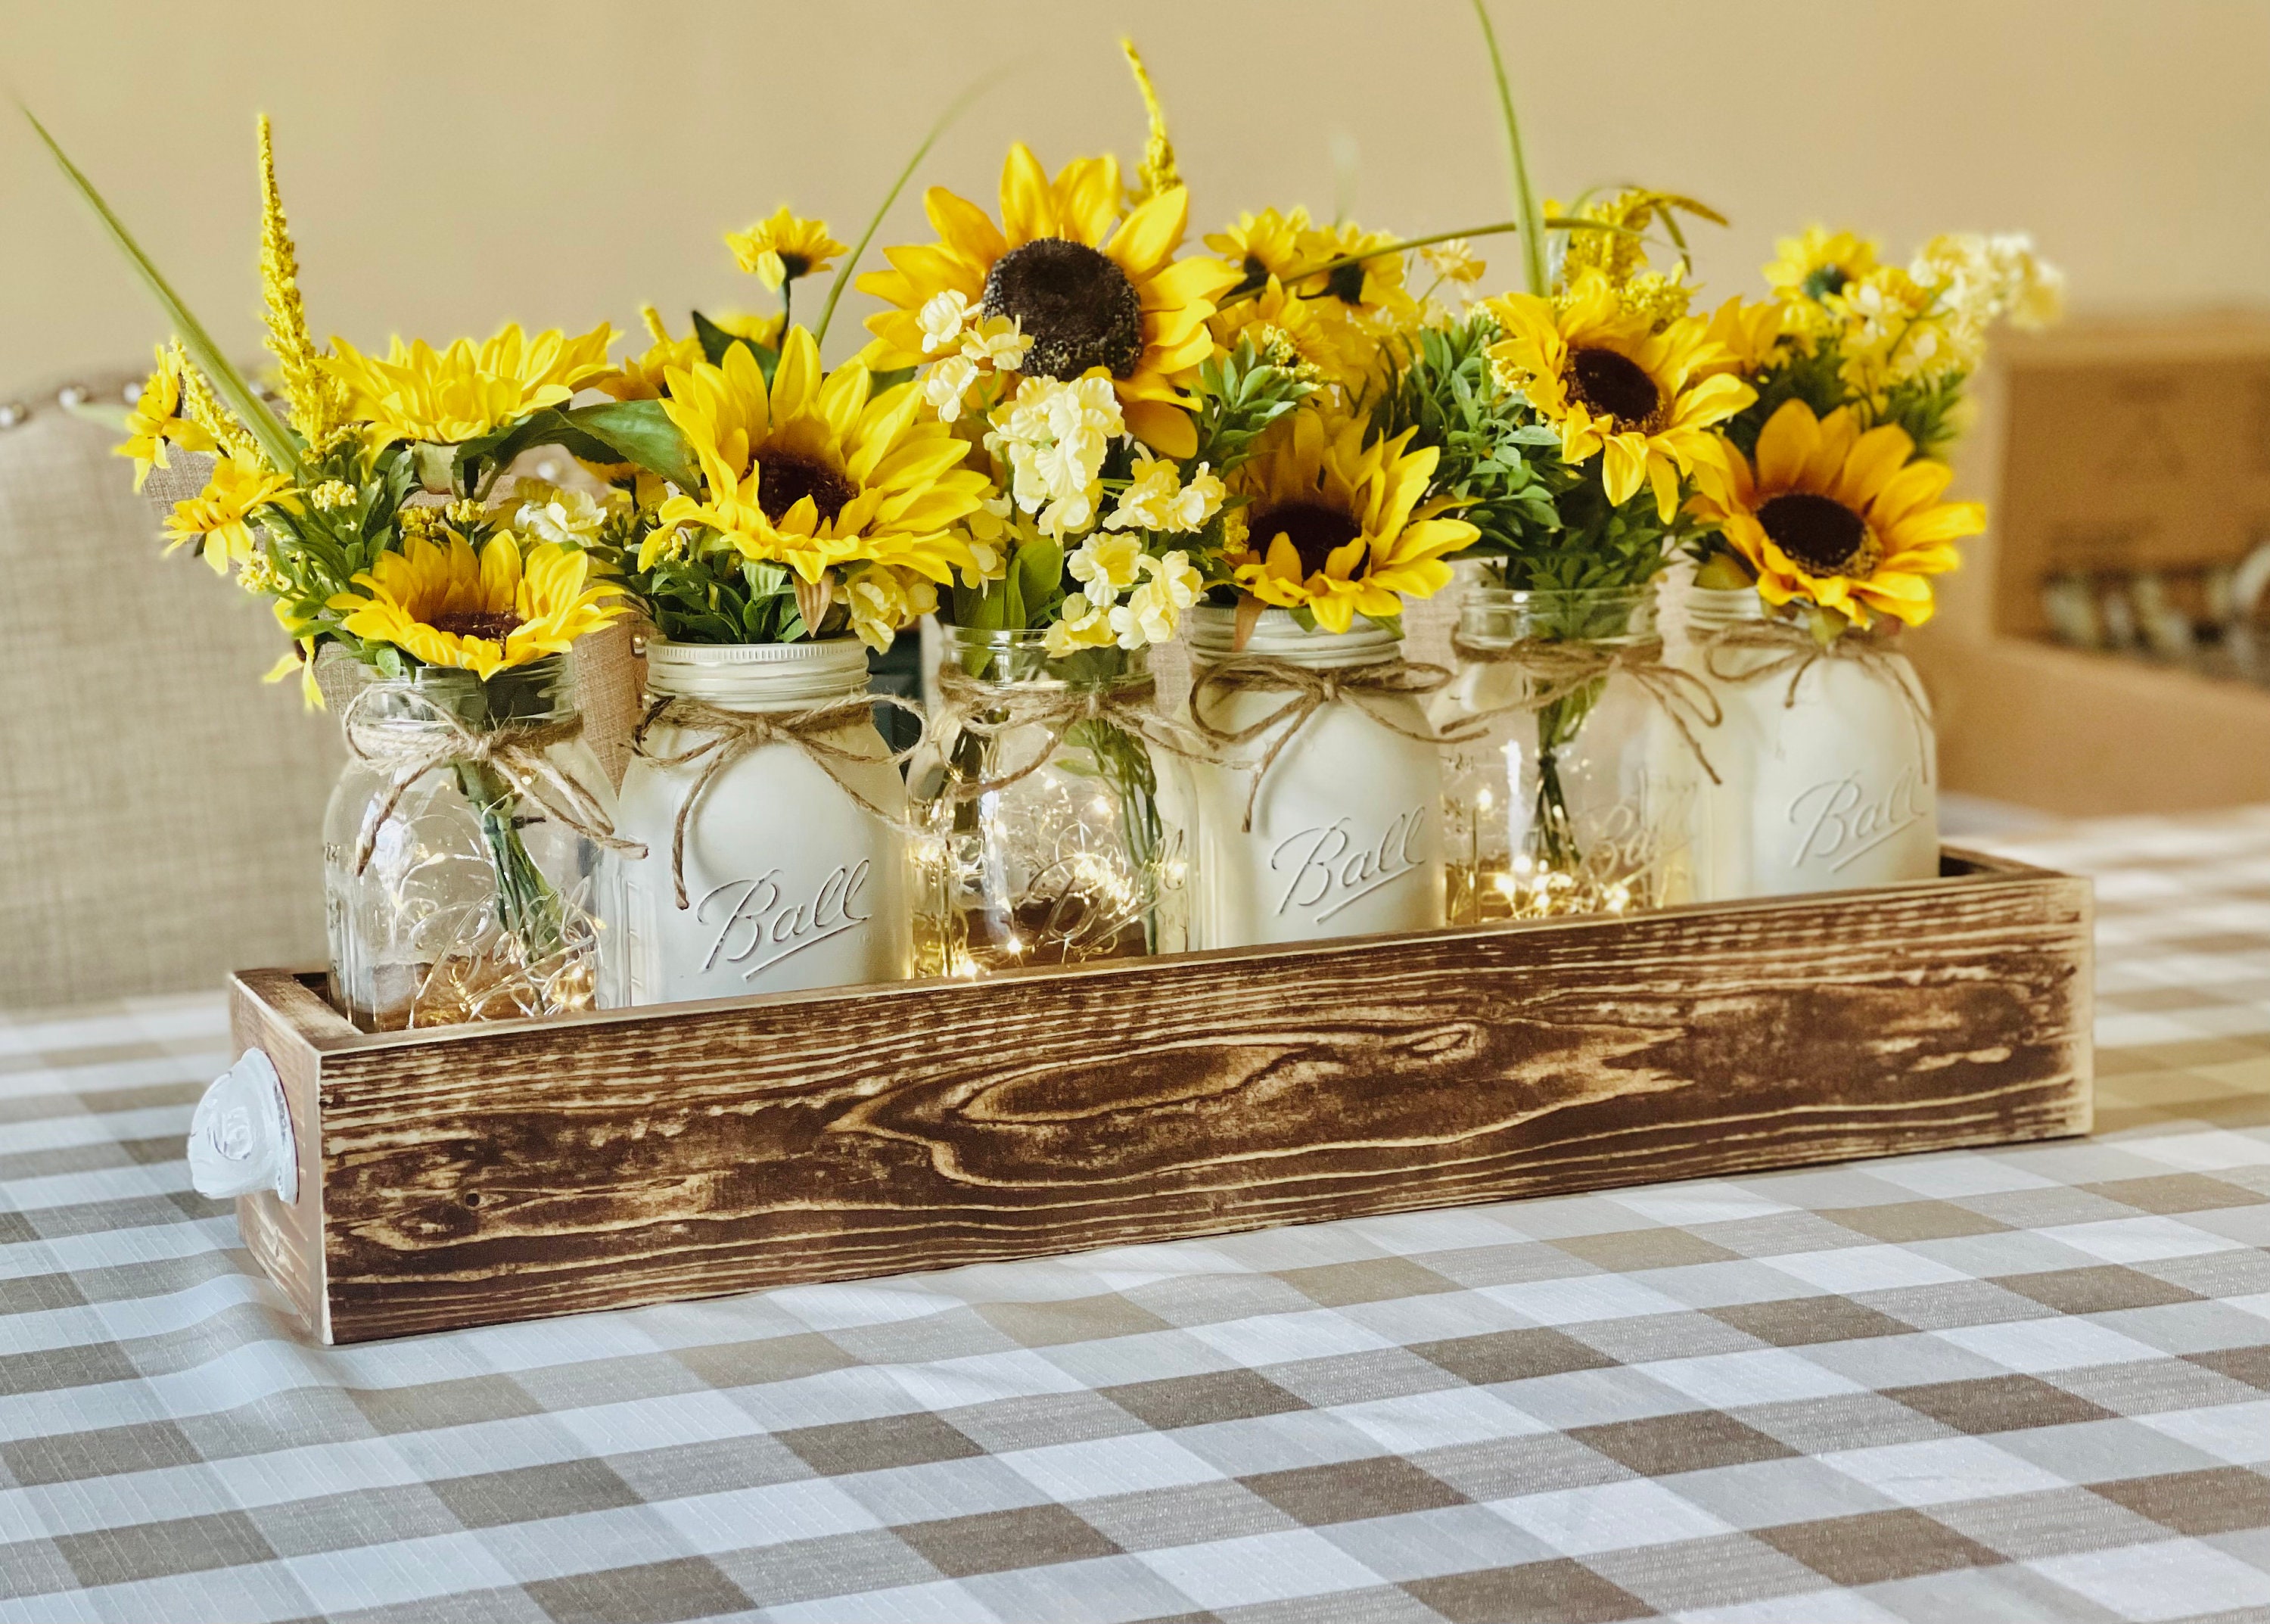 Lightful Manual Sunflower Country Style Paper Holder